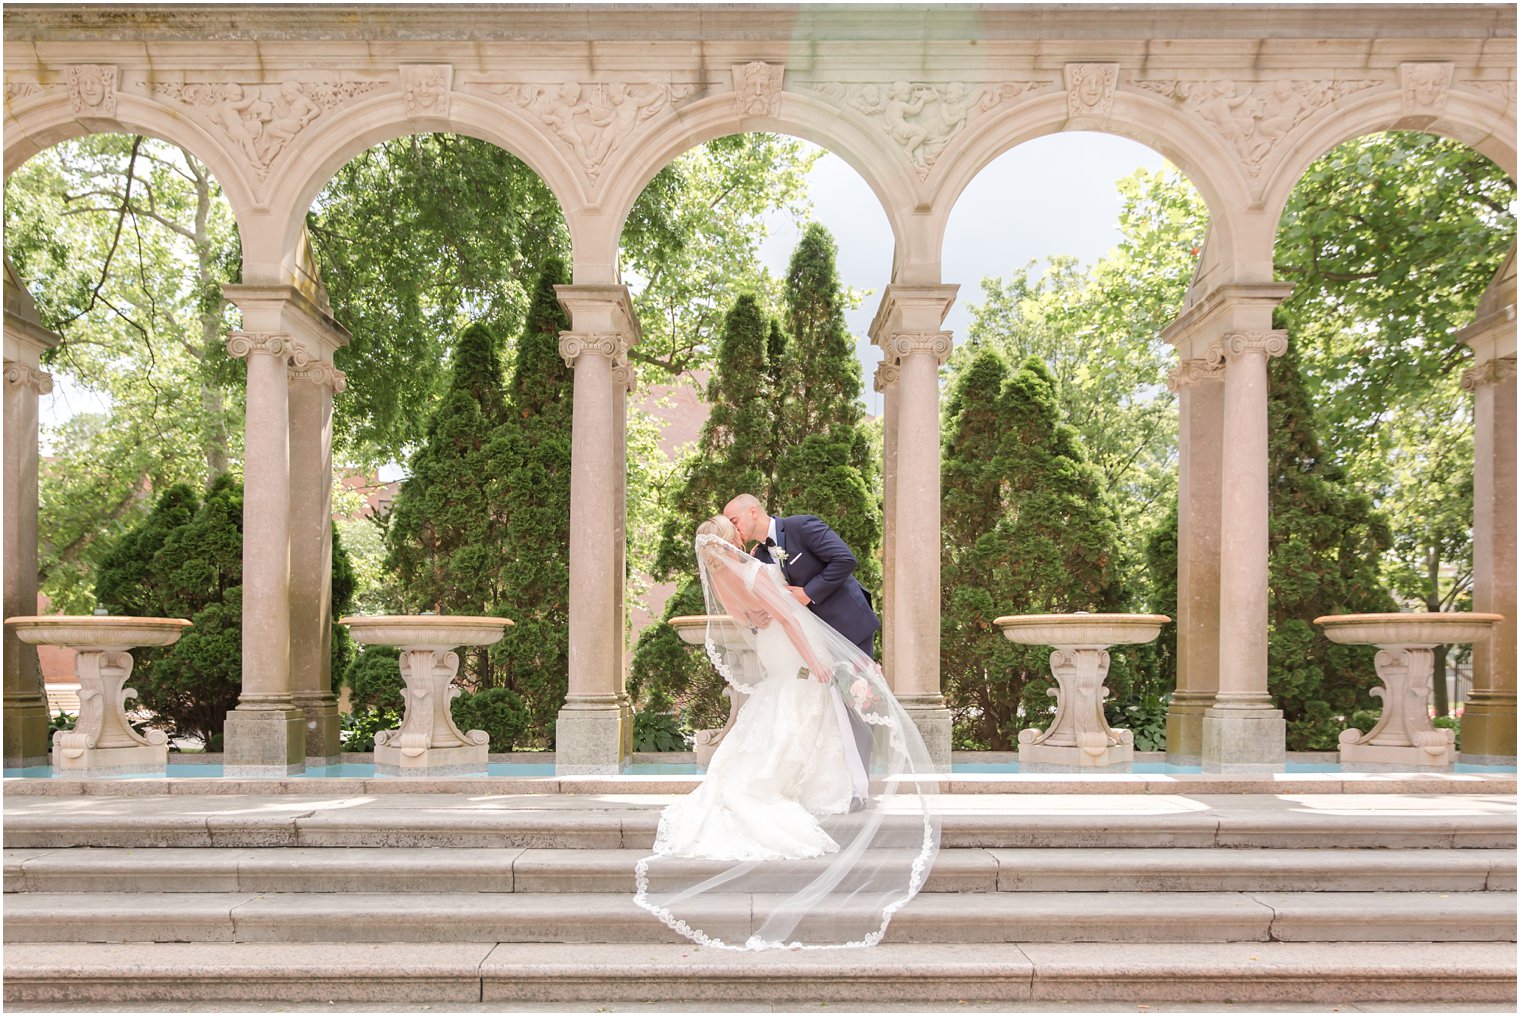 Classic bride and groom portraits at Monmouth University